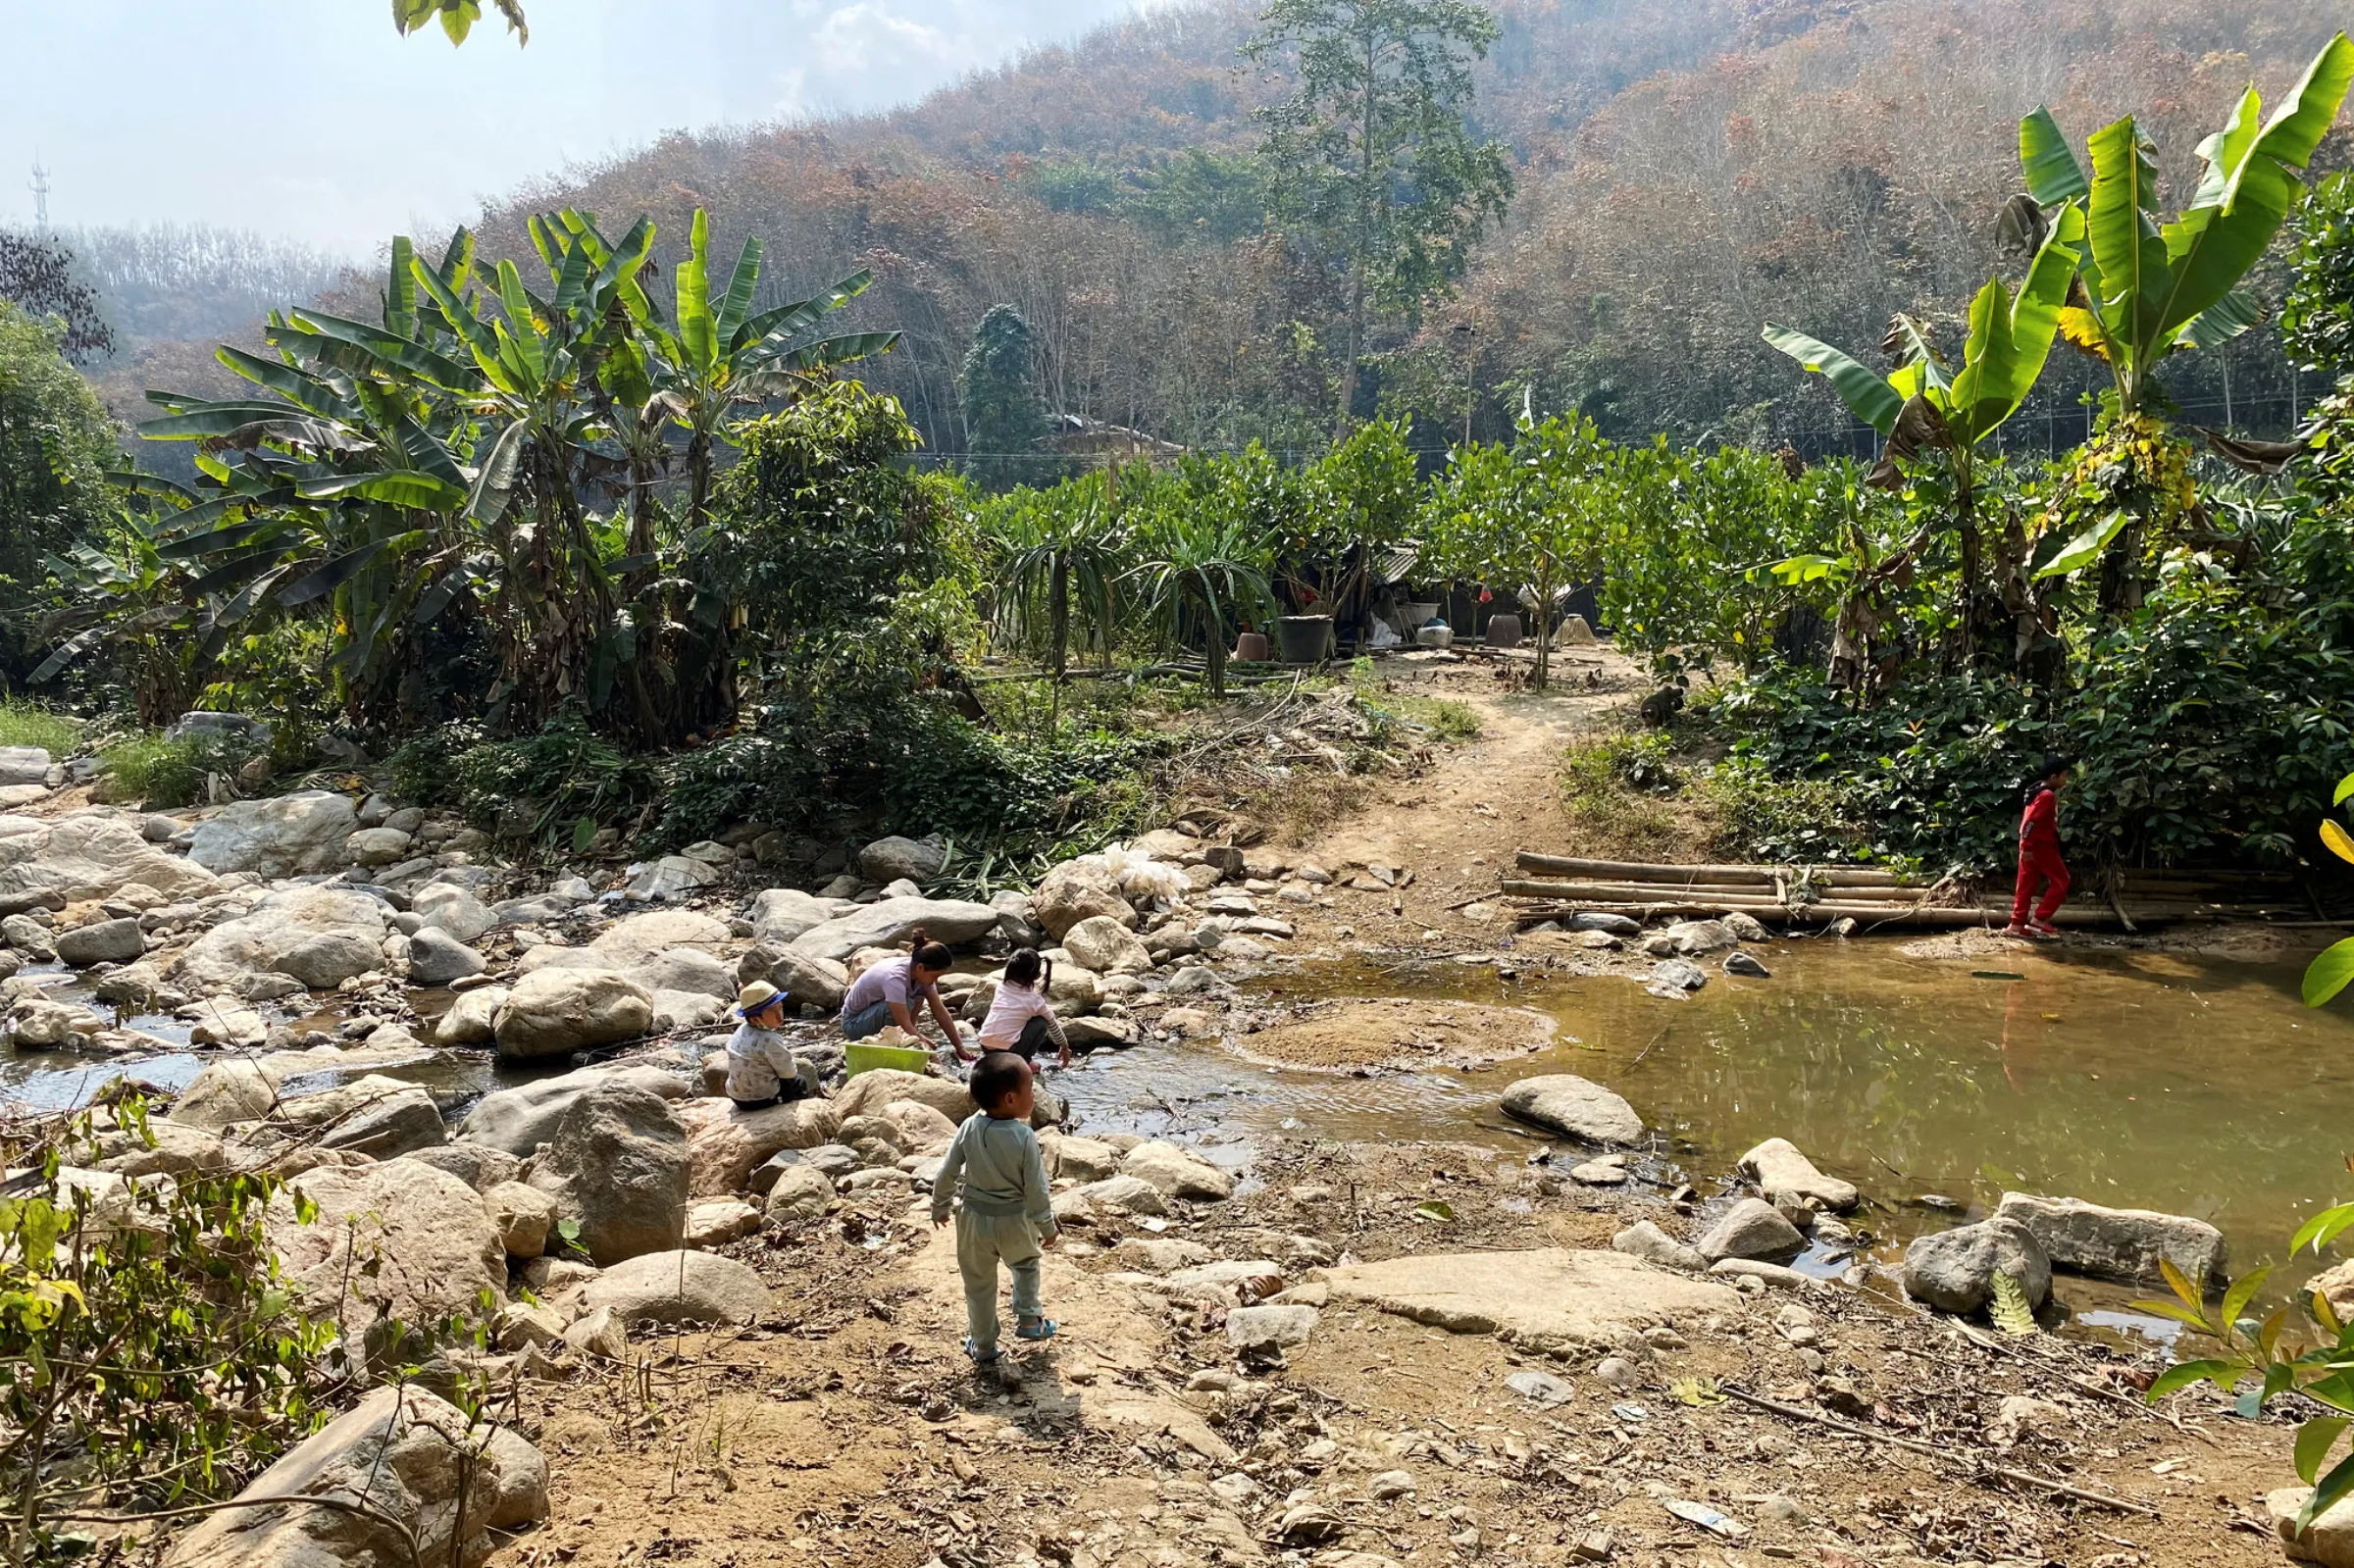 A child walks towards a nature protection zone at Mandian village in Xishuangbanna Dai Autonomous Prefecture, Yunnan province, China, January 29, 2021